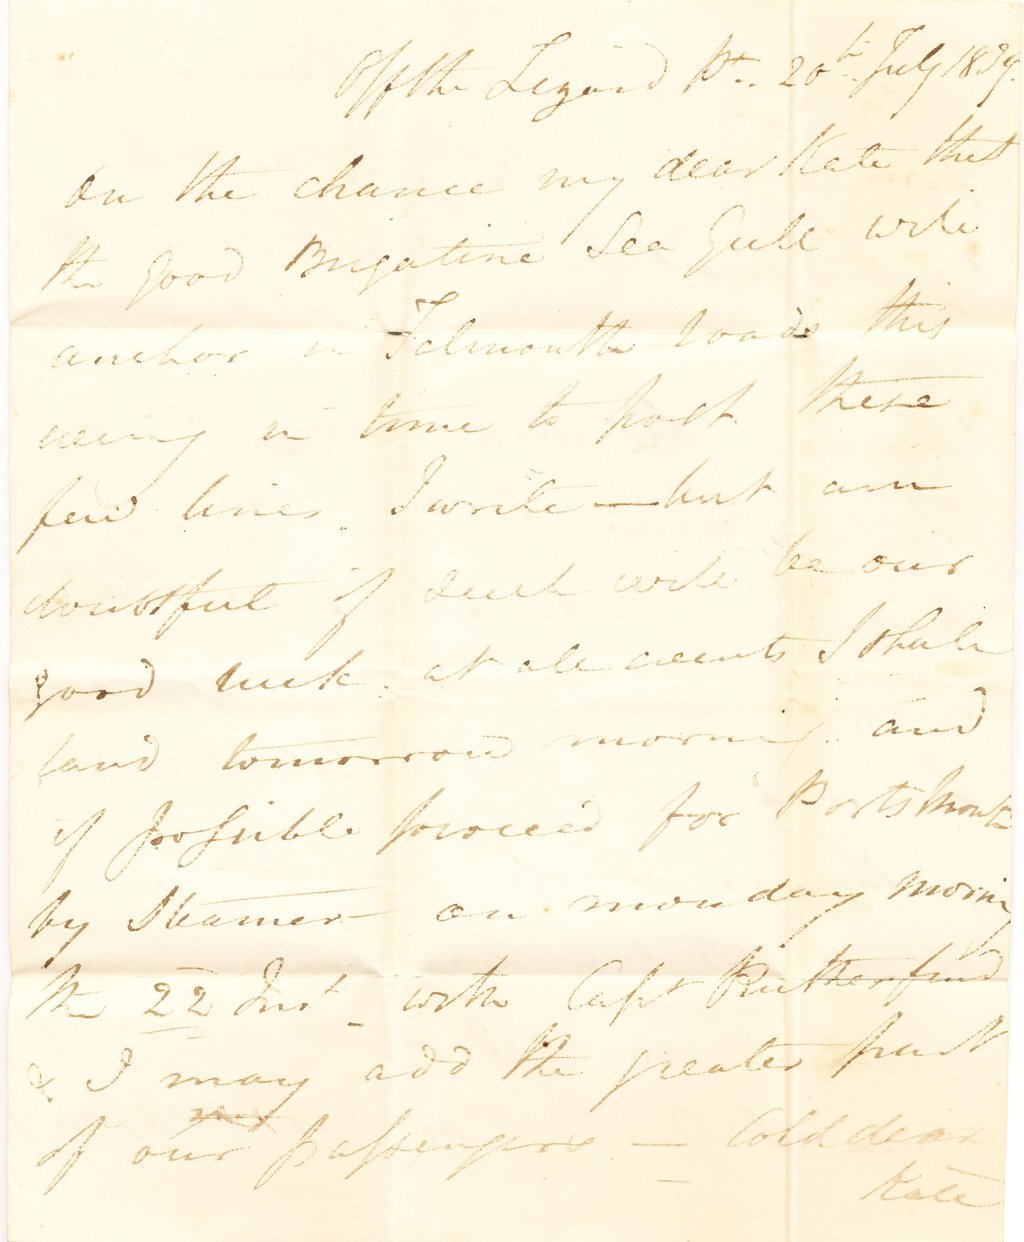 Letter 126, page 1